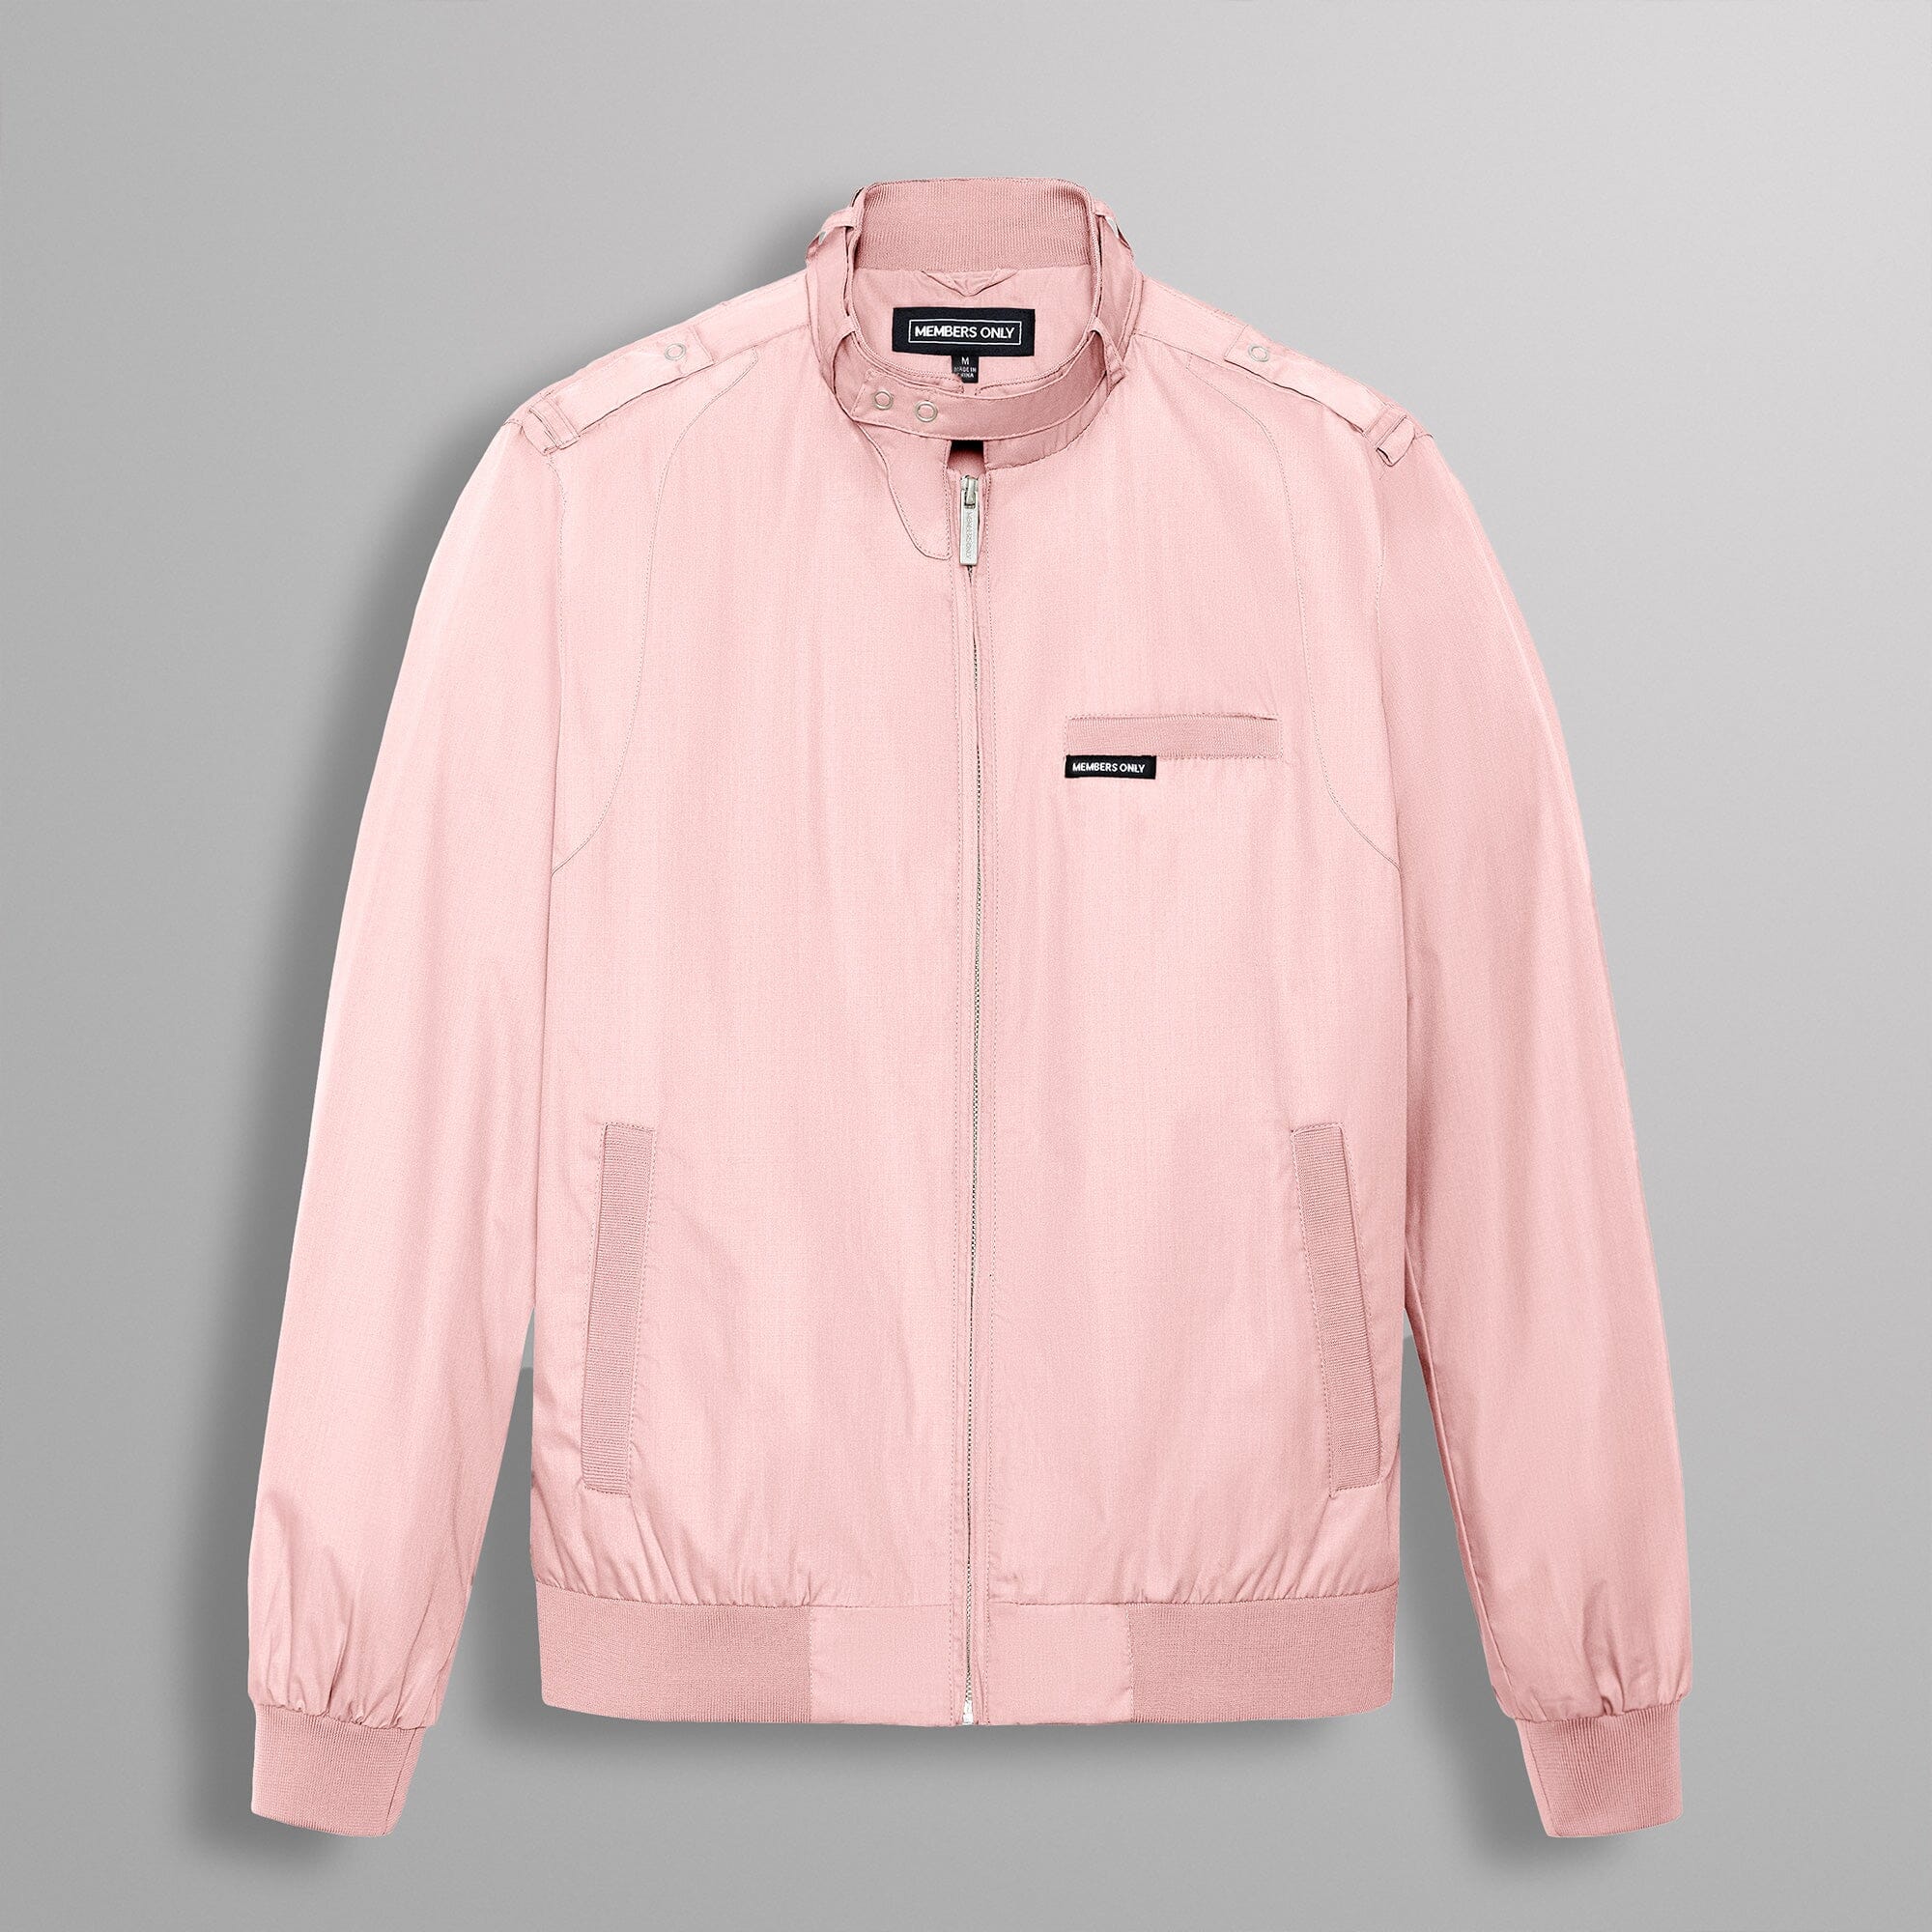 Women's Classic Iconic Racer Jacket (Slim Fit) Women Iconic Racer Jacket Members Only Official 